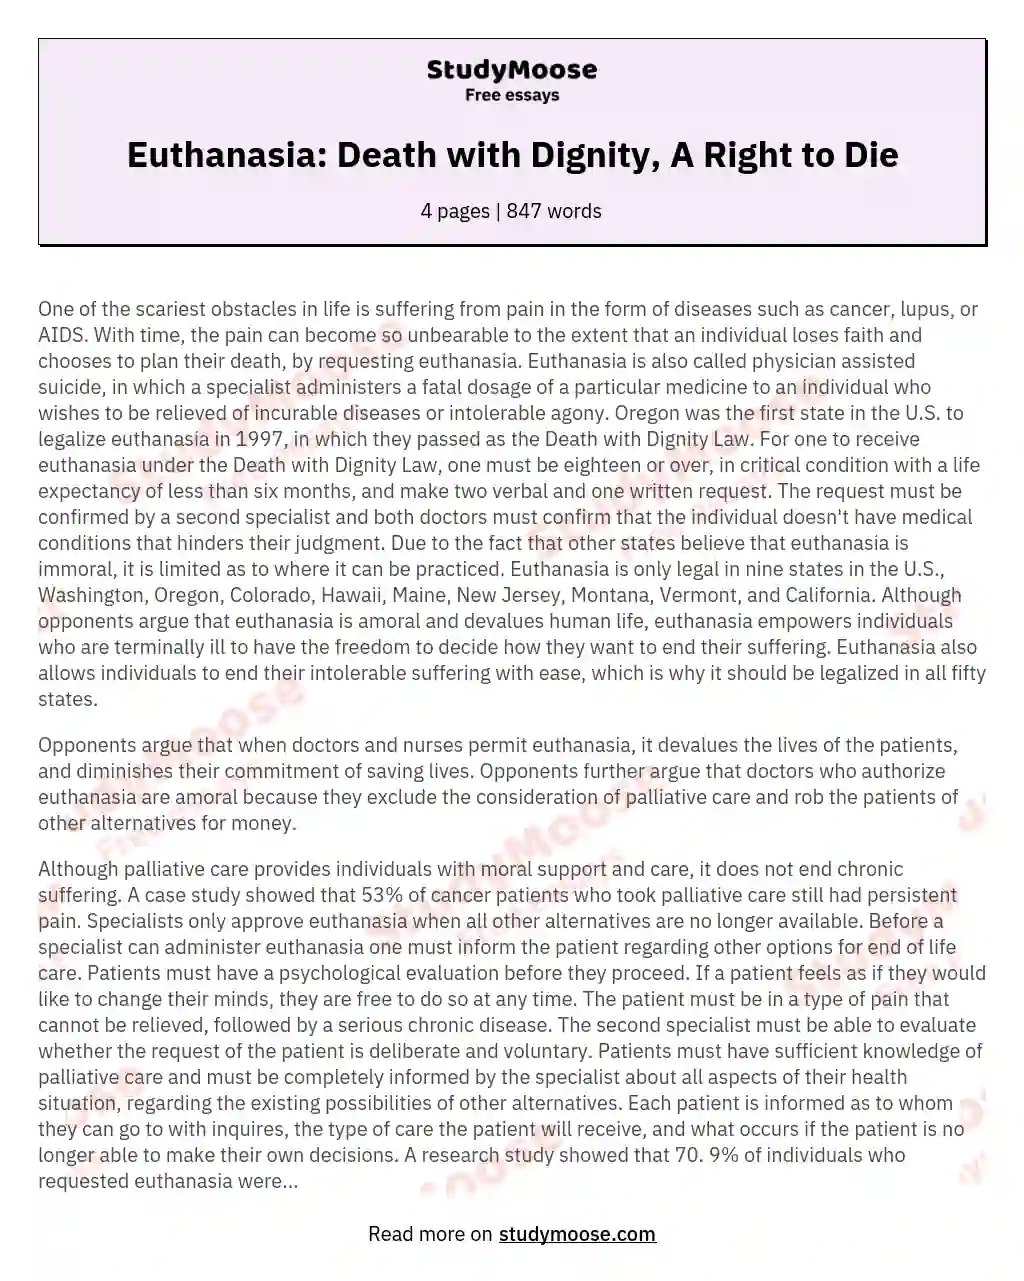 Euthanasia: Death with Dignity, A Right to Die